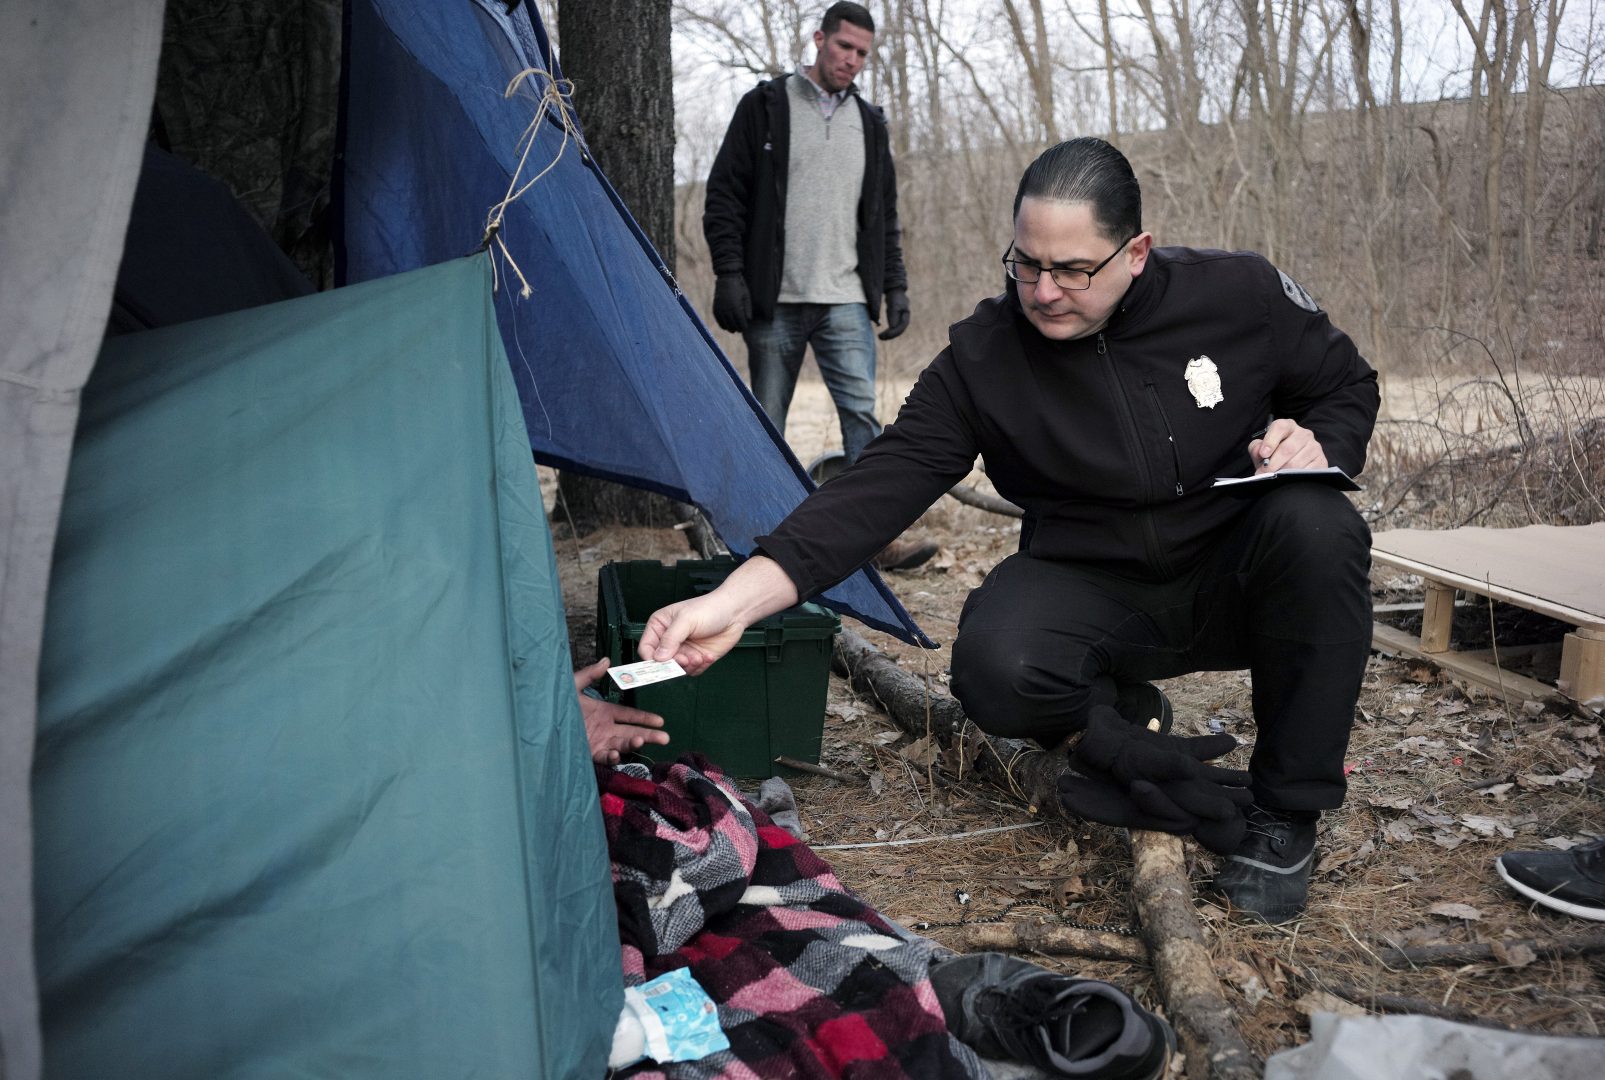 In this Tuesday, Feb. 12, 2019 photo Worcester Police officer Angel Rivera, right, returns a license to an unidentified man as Rivera asks if he has been tested for Hepatitis A at the entrance to a tent where the man spent the night in a wooded area, in Worcester, Mass. Dan Cahill, City of Worcester sanitary inspector, walks behind center. The city was hit hard when recent hepatitis A outbreaks across the country started sickening and killing homeless people and illicit drug users. (AP Photo/Steven Senne)